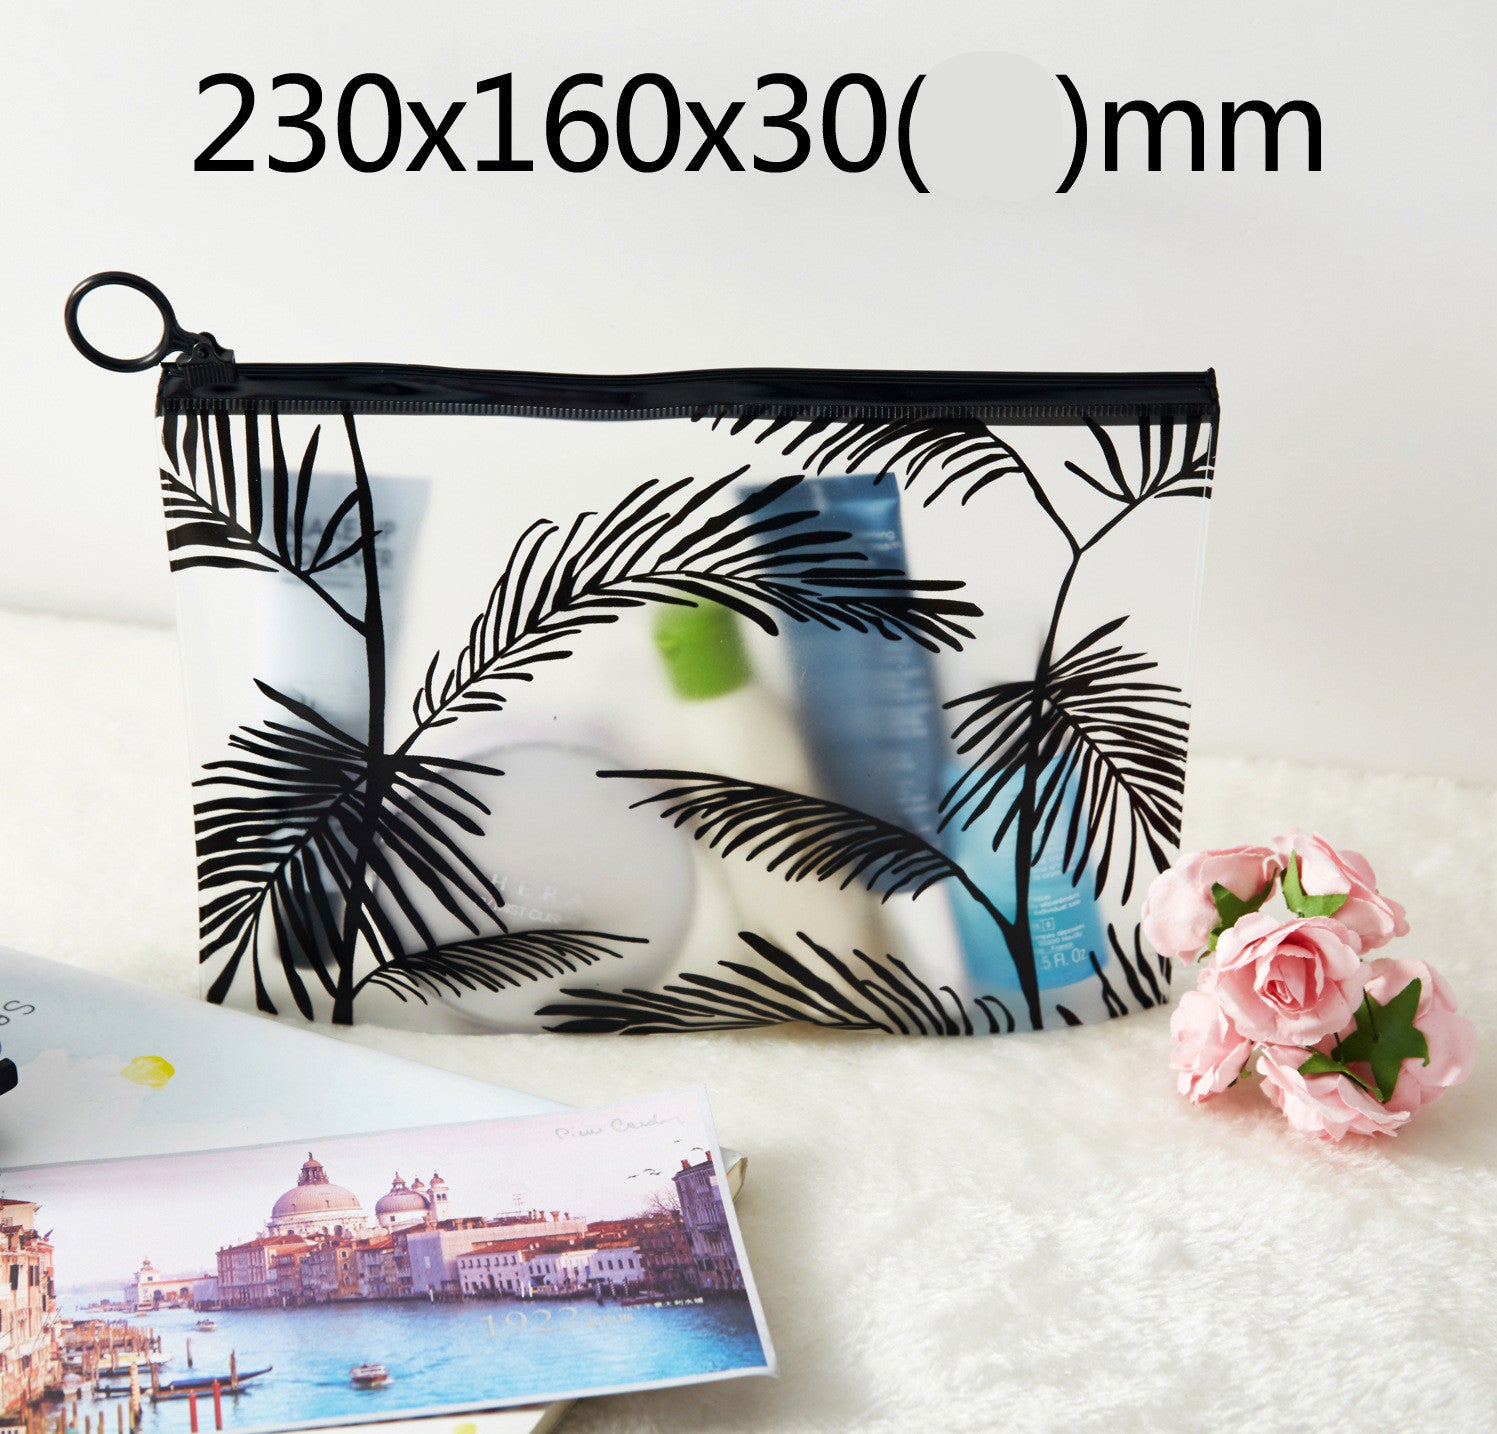 Storage Frosted Plastic Universal Packaging Bag